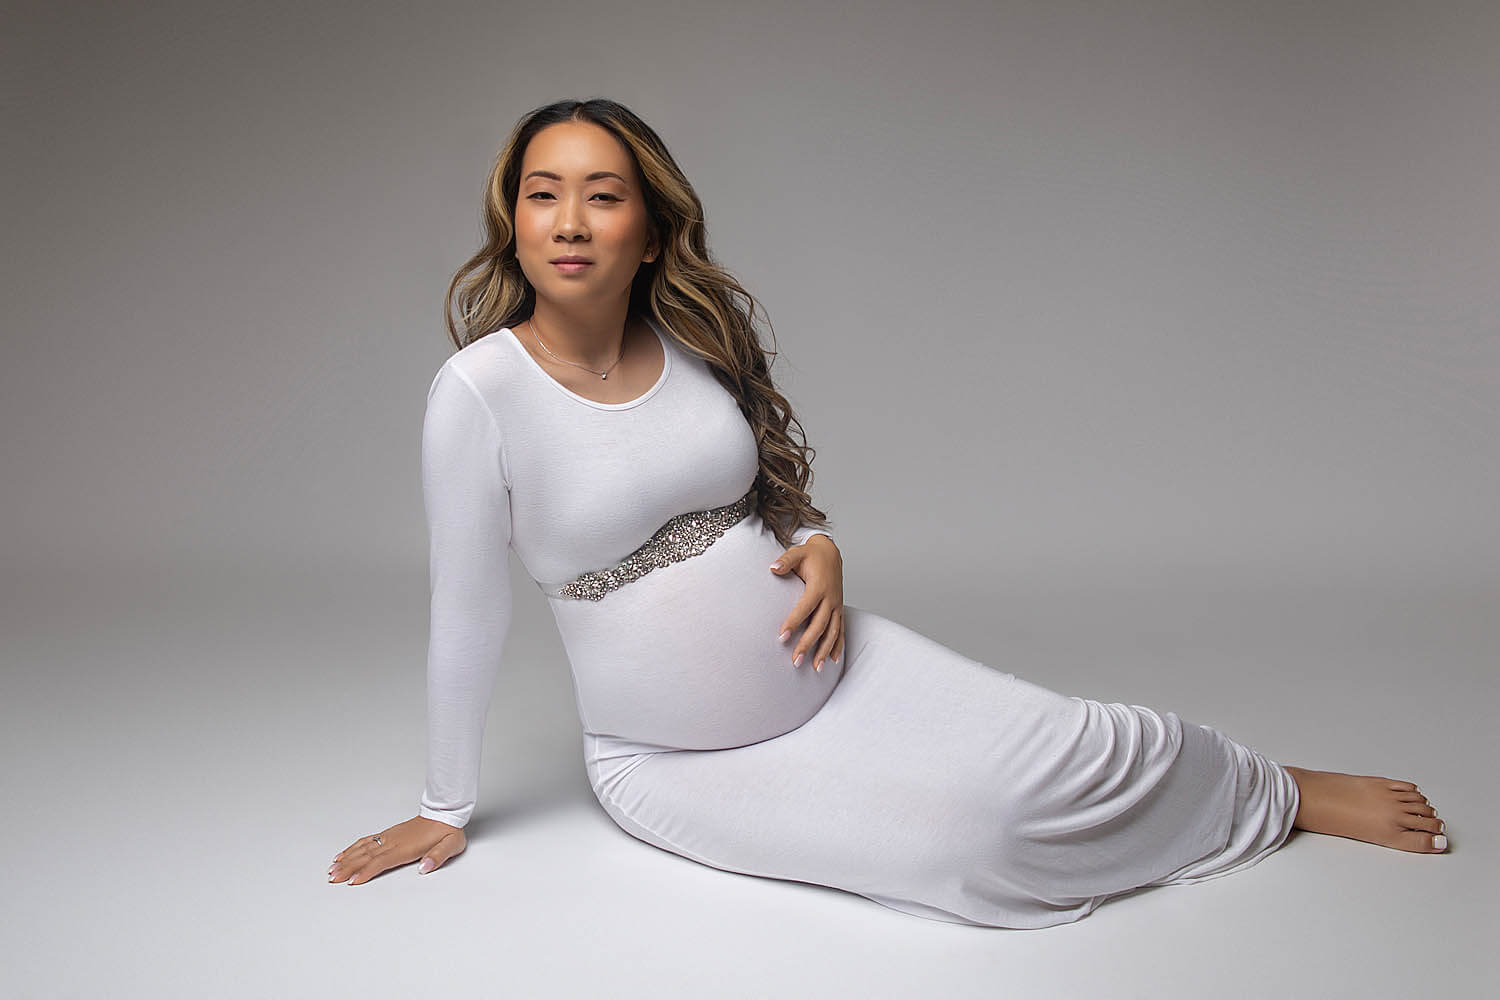 Pregnant woman wearing white dress for maternity sitting on floor in pembroke pines, fl